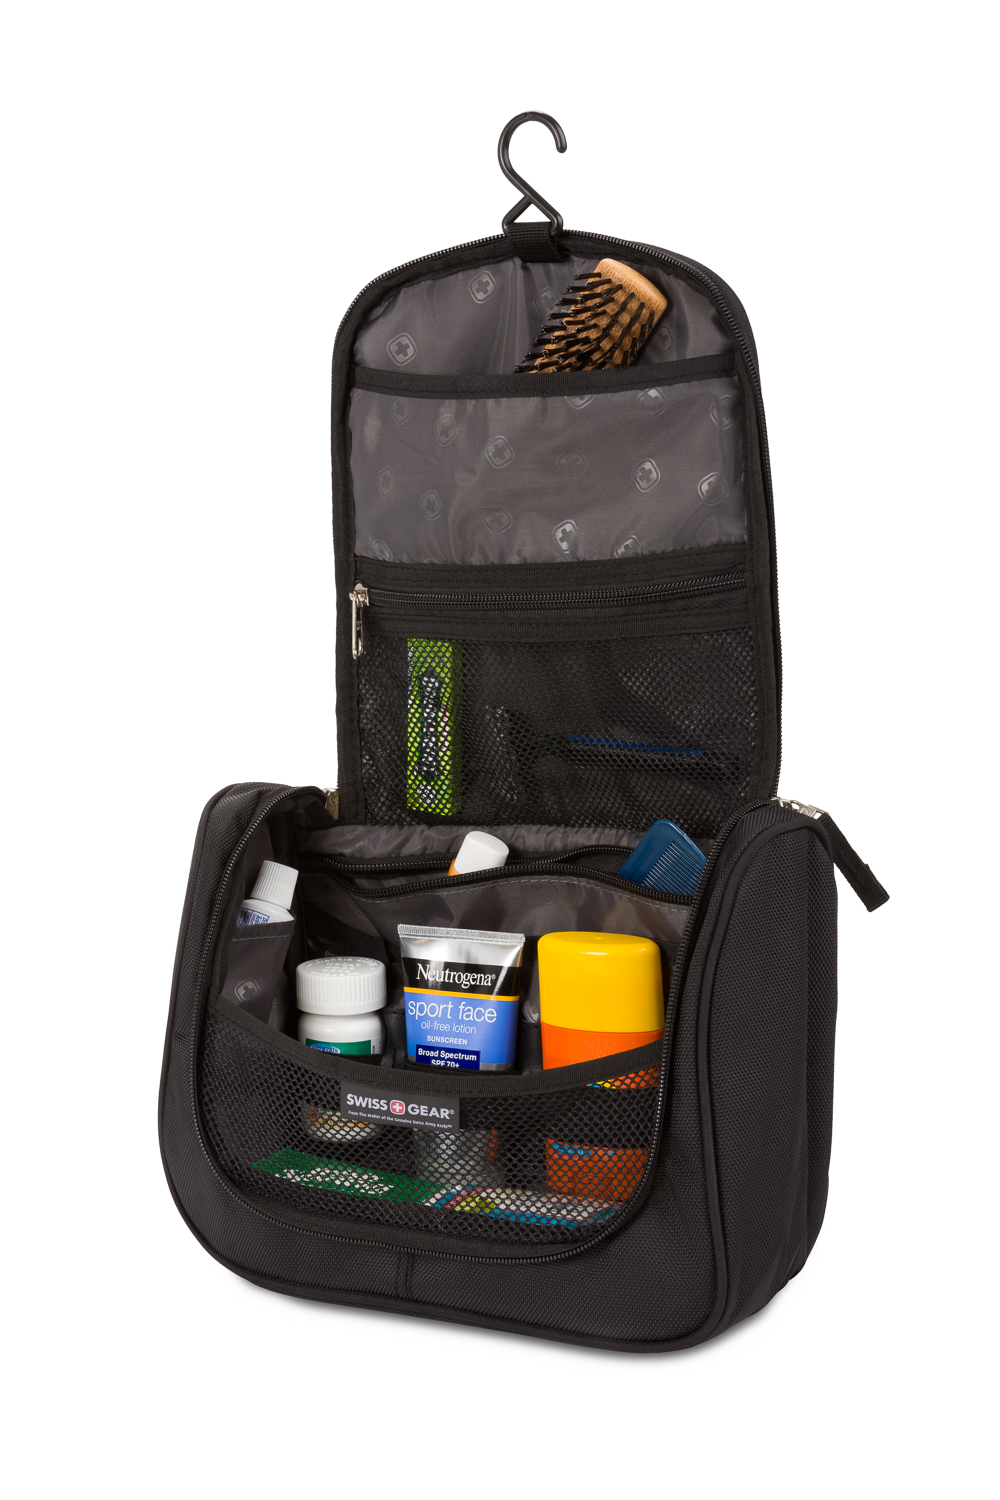 15 Best TSA-Approved Toiletry Bags for Hassle-free Air Travel | PINKVILLA